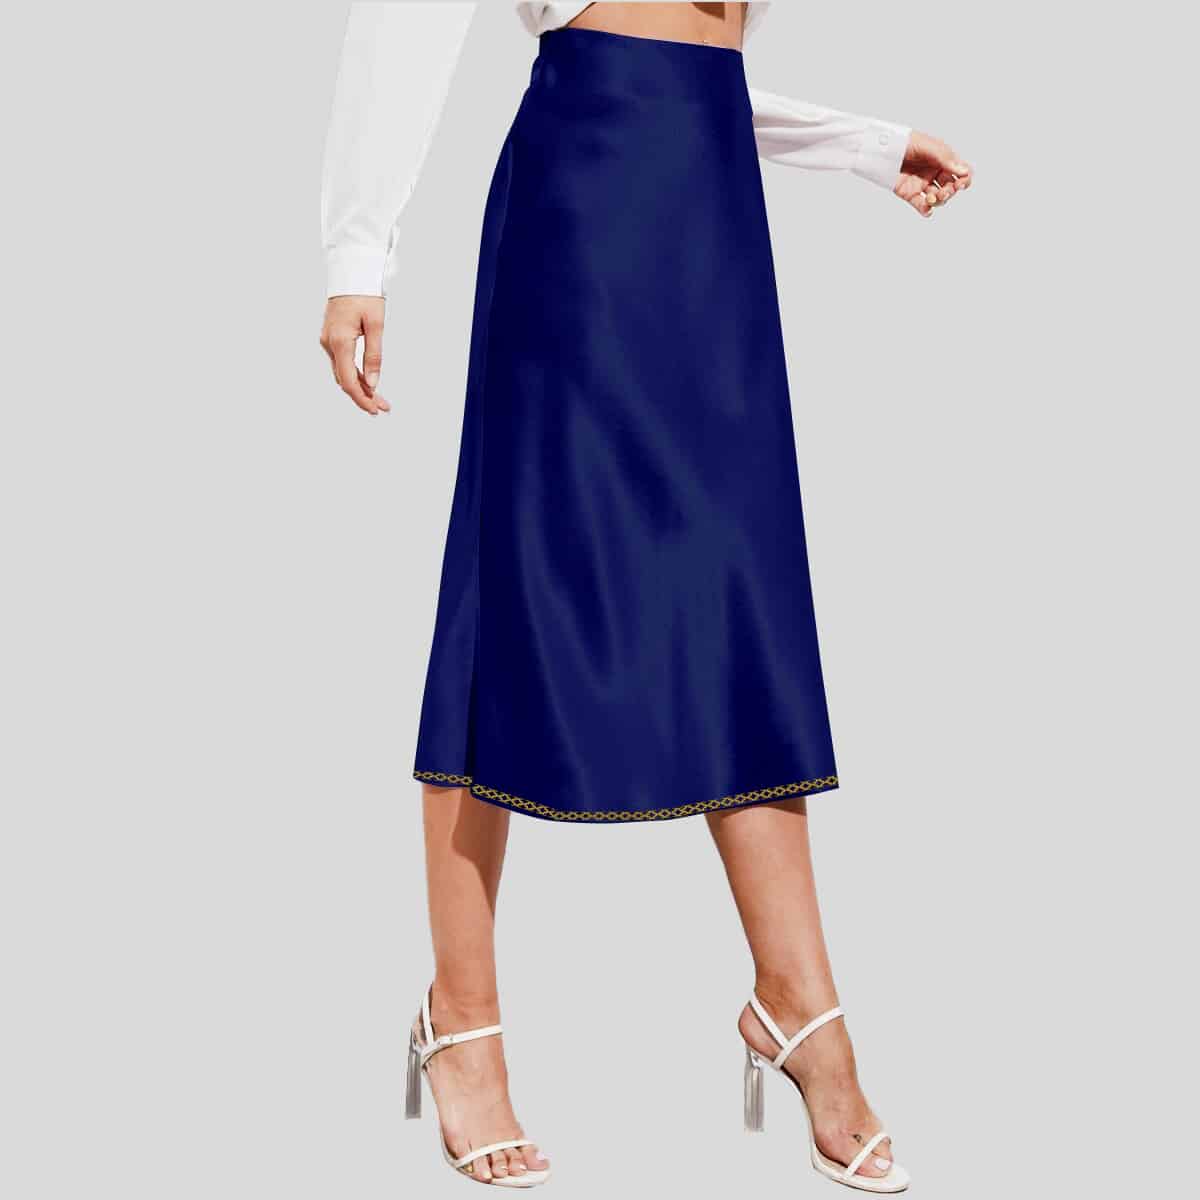 Navy Blue Zipper Side Solid Satin Skirt with Print Detailed-RES013